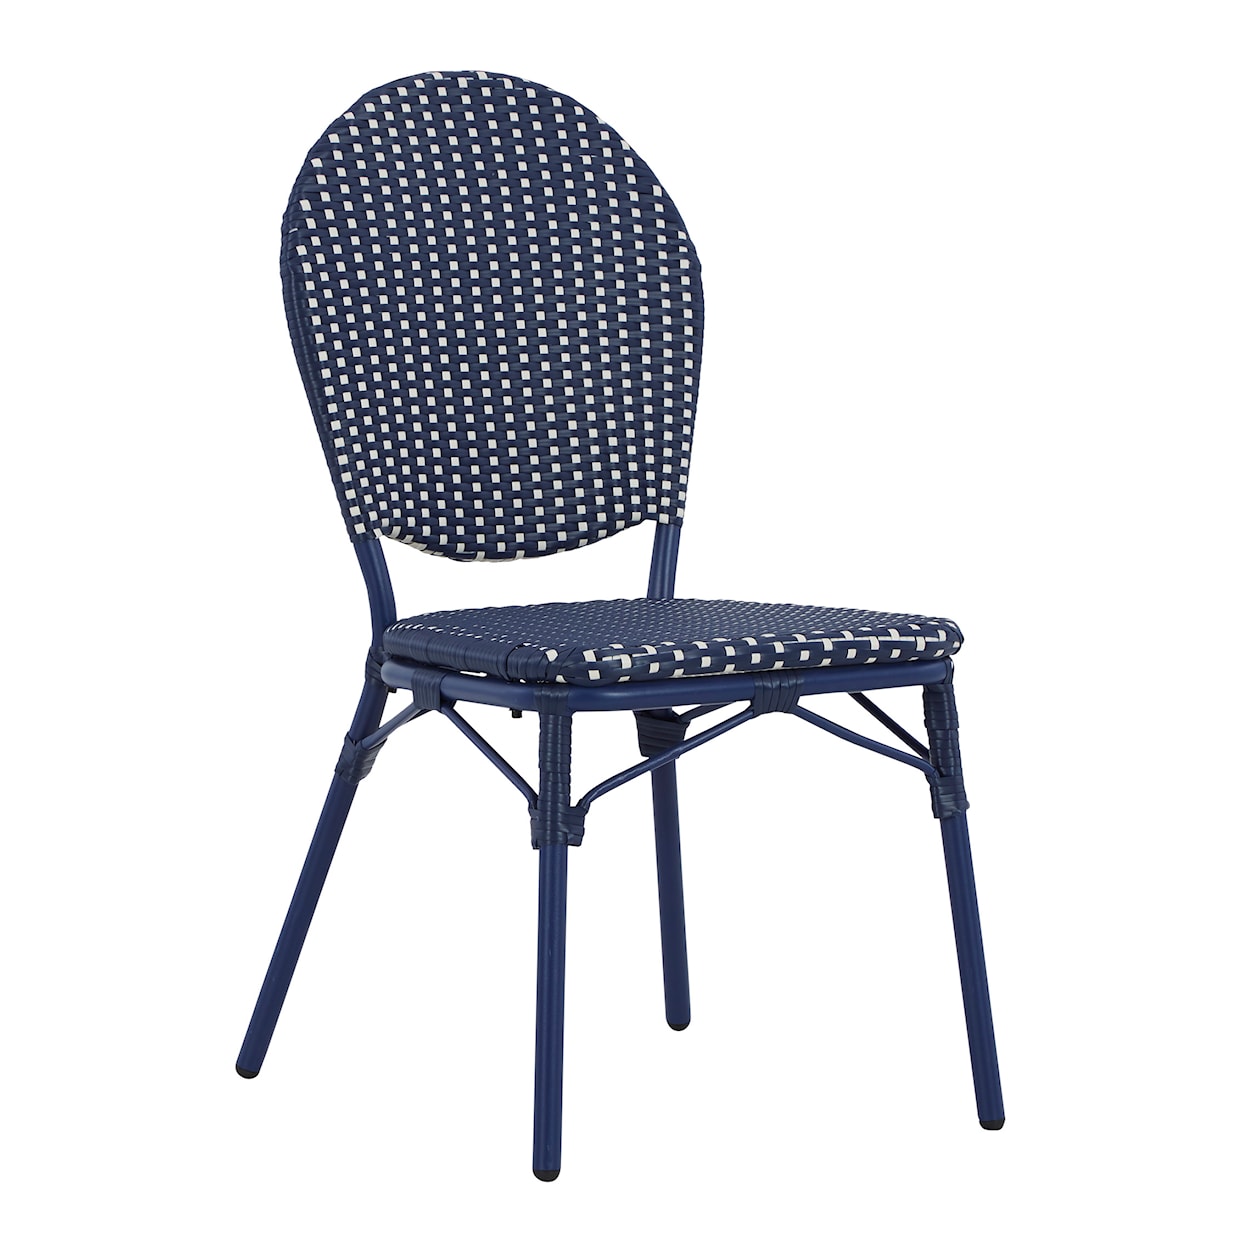 Signature Design by Ashley Odyssey Blue Outdoor Table and Chairs (Set of 3)